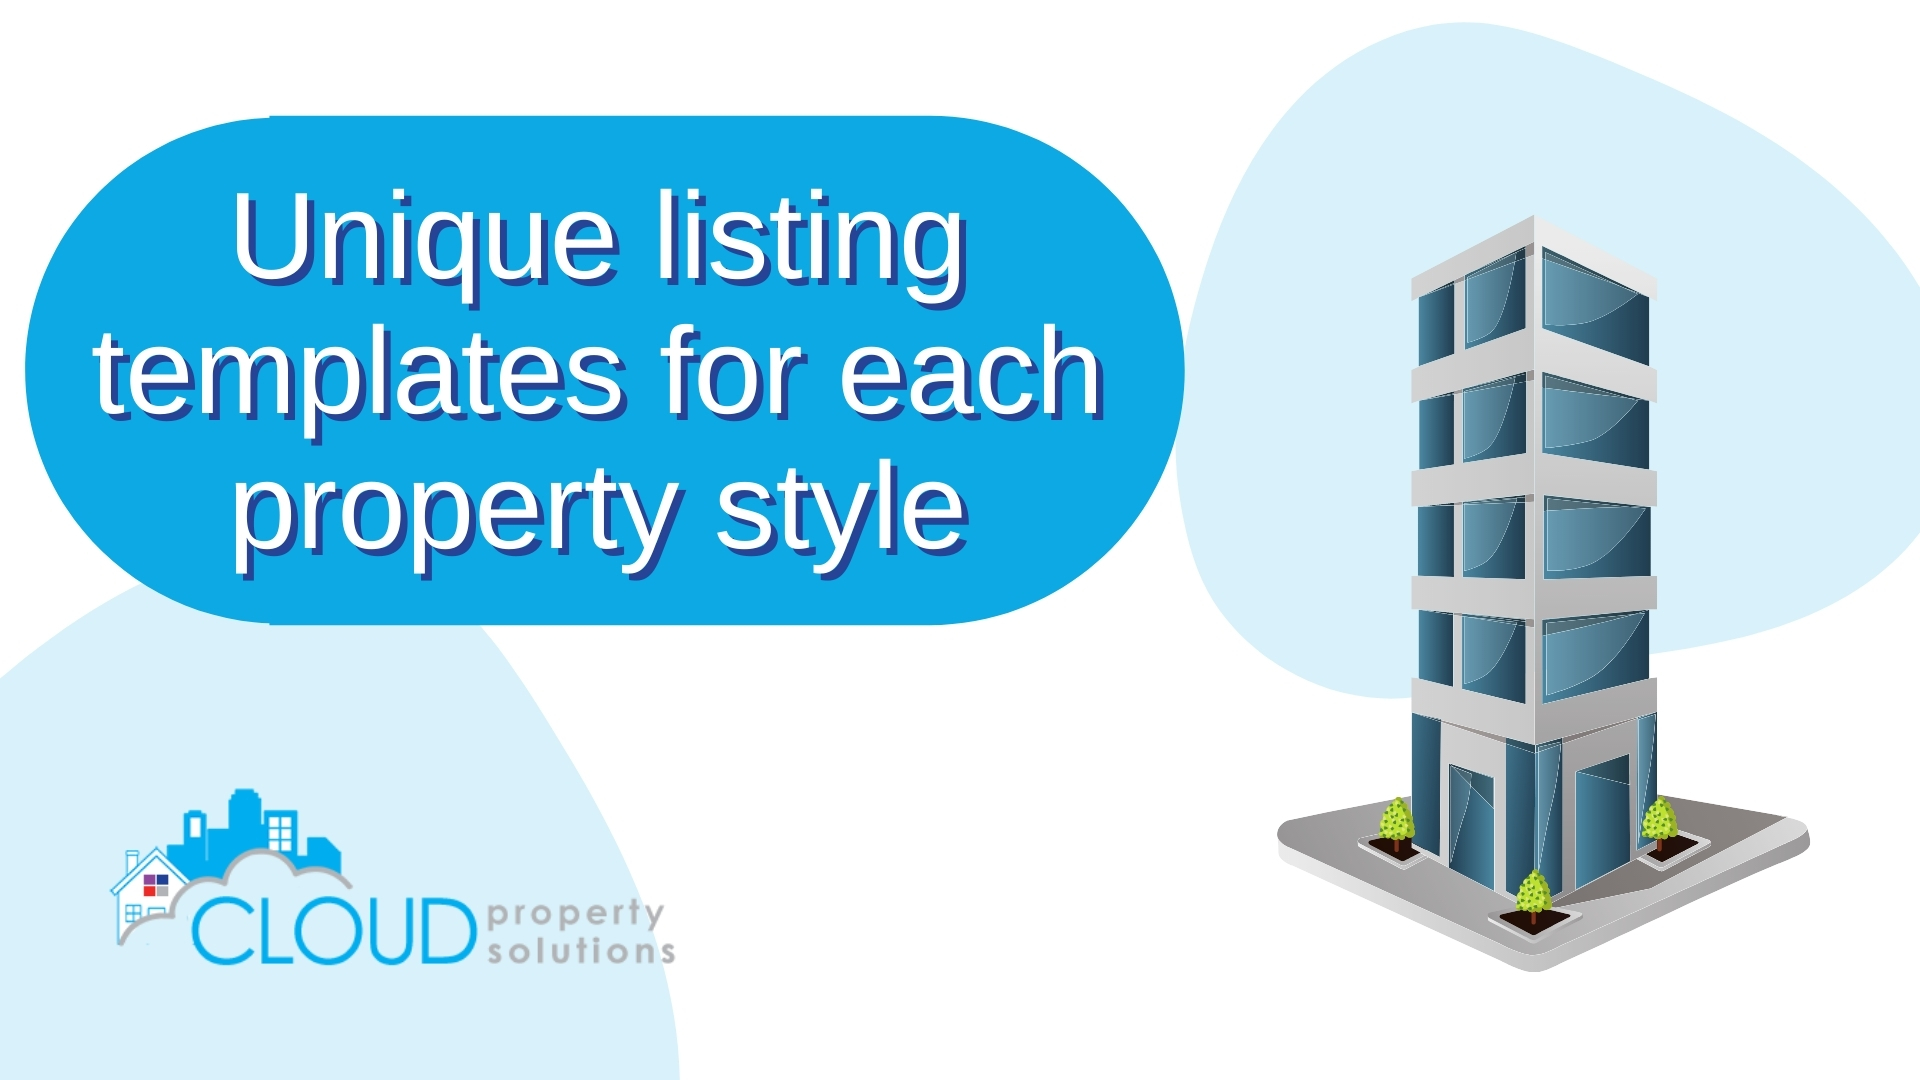 Listing info panels change according to selected property styles